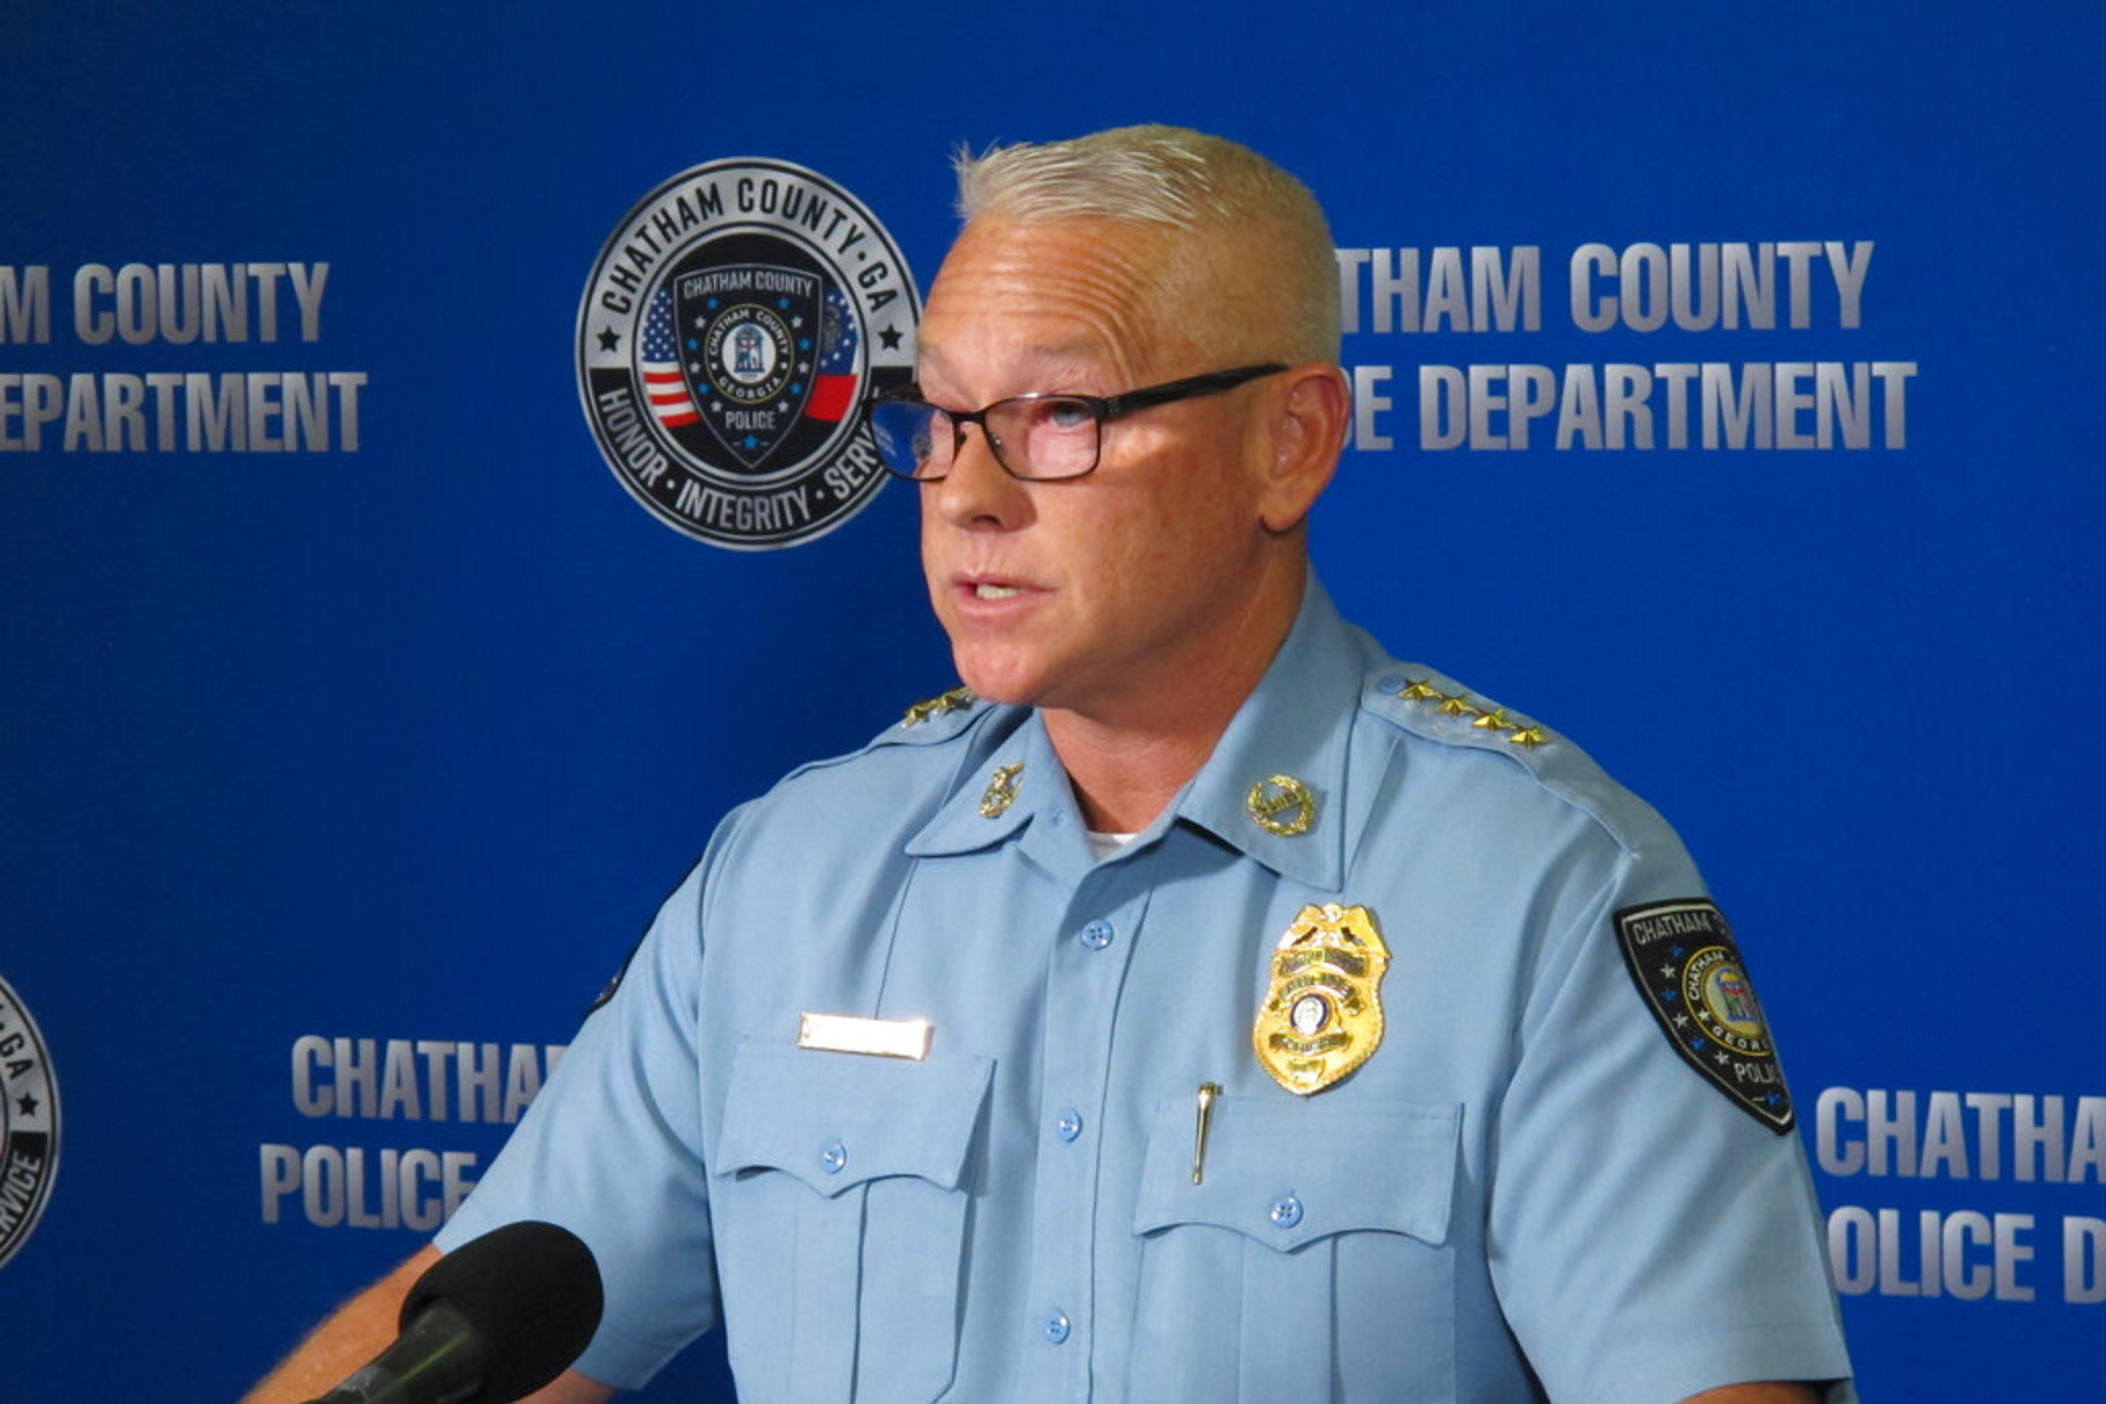 Chatham County Police Chief Jeff Hadley speaks to reporters in Savannah, Ga., on Thursday, Oct. 13, 2022, about the investigation into the suspected death of missing toddler Quinton Simon. Hadley said investigators believe the 20-month-old boy is dead based on interviews and evidence collected since the child was reported missing on Oct. 5.